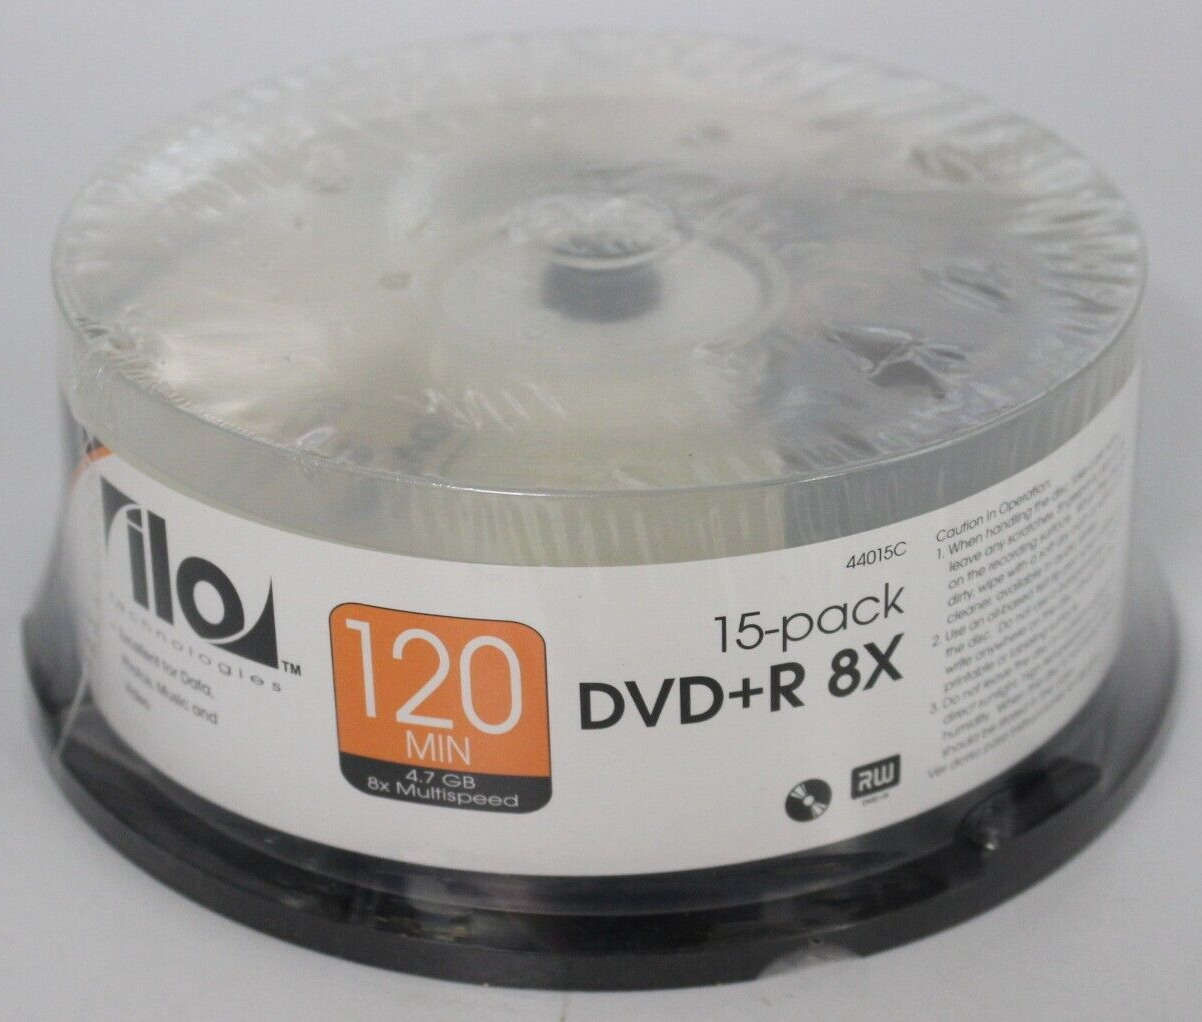 ilo DVD+R 8X 15 Pack New Sealed Pack Blank DVDs Disc Writable 4.7GB 120 Min